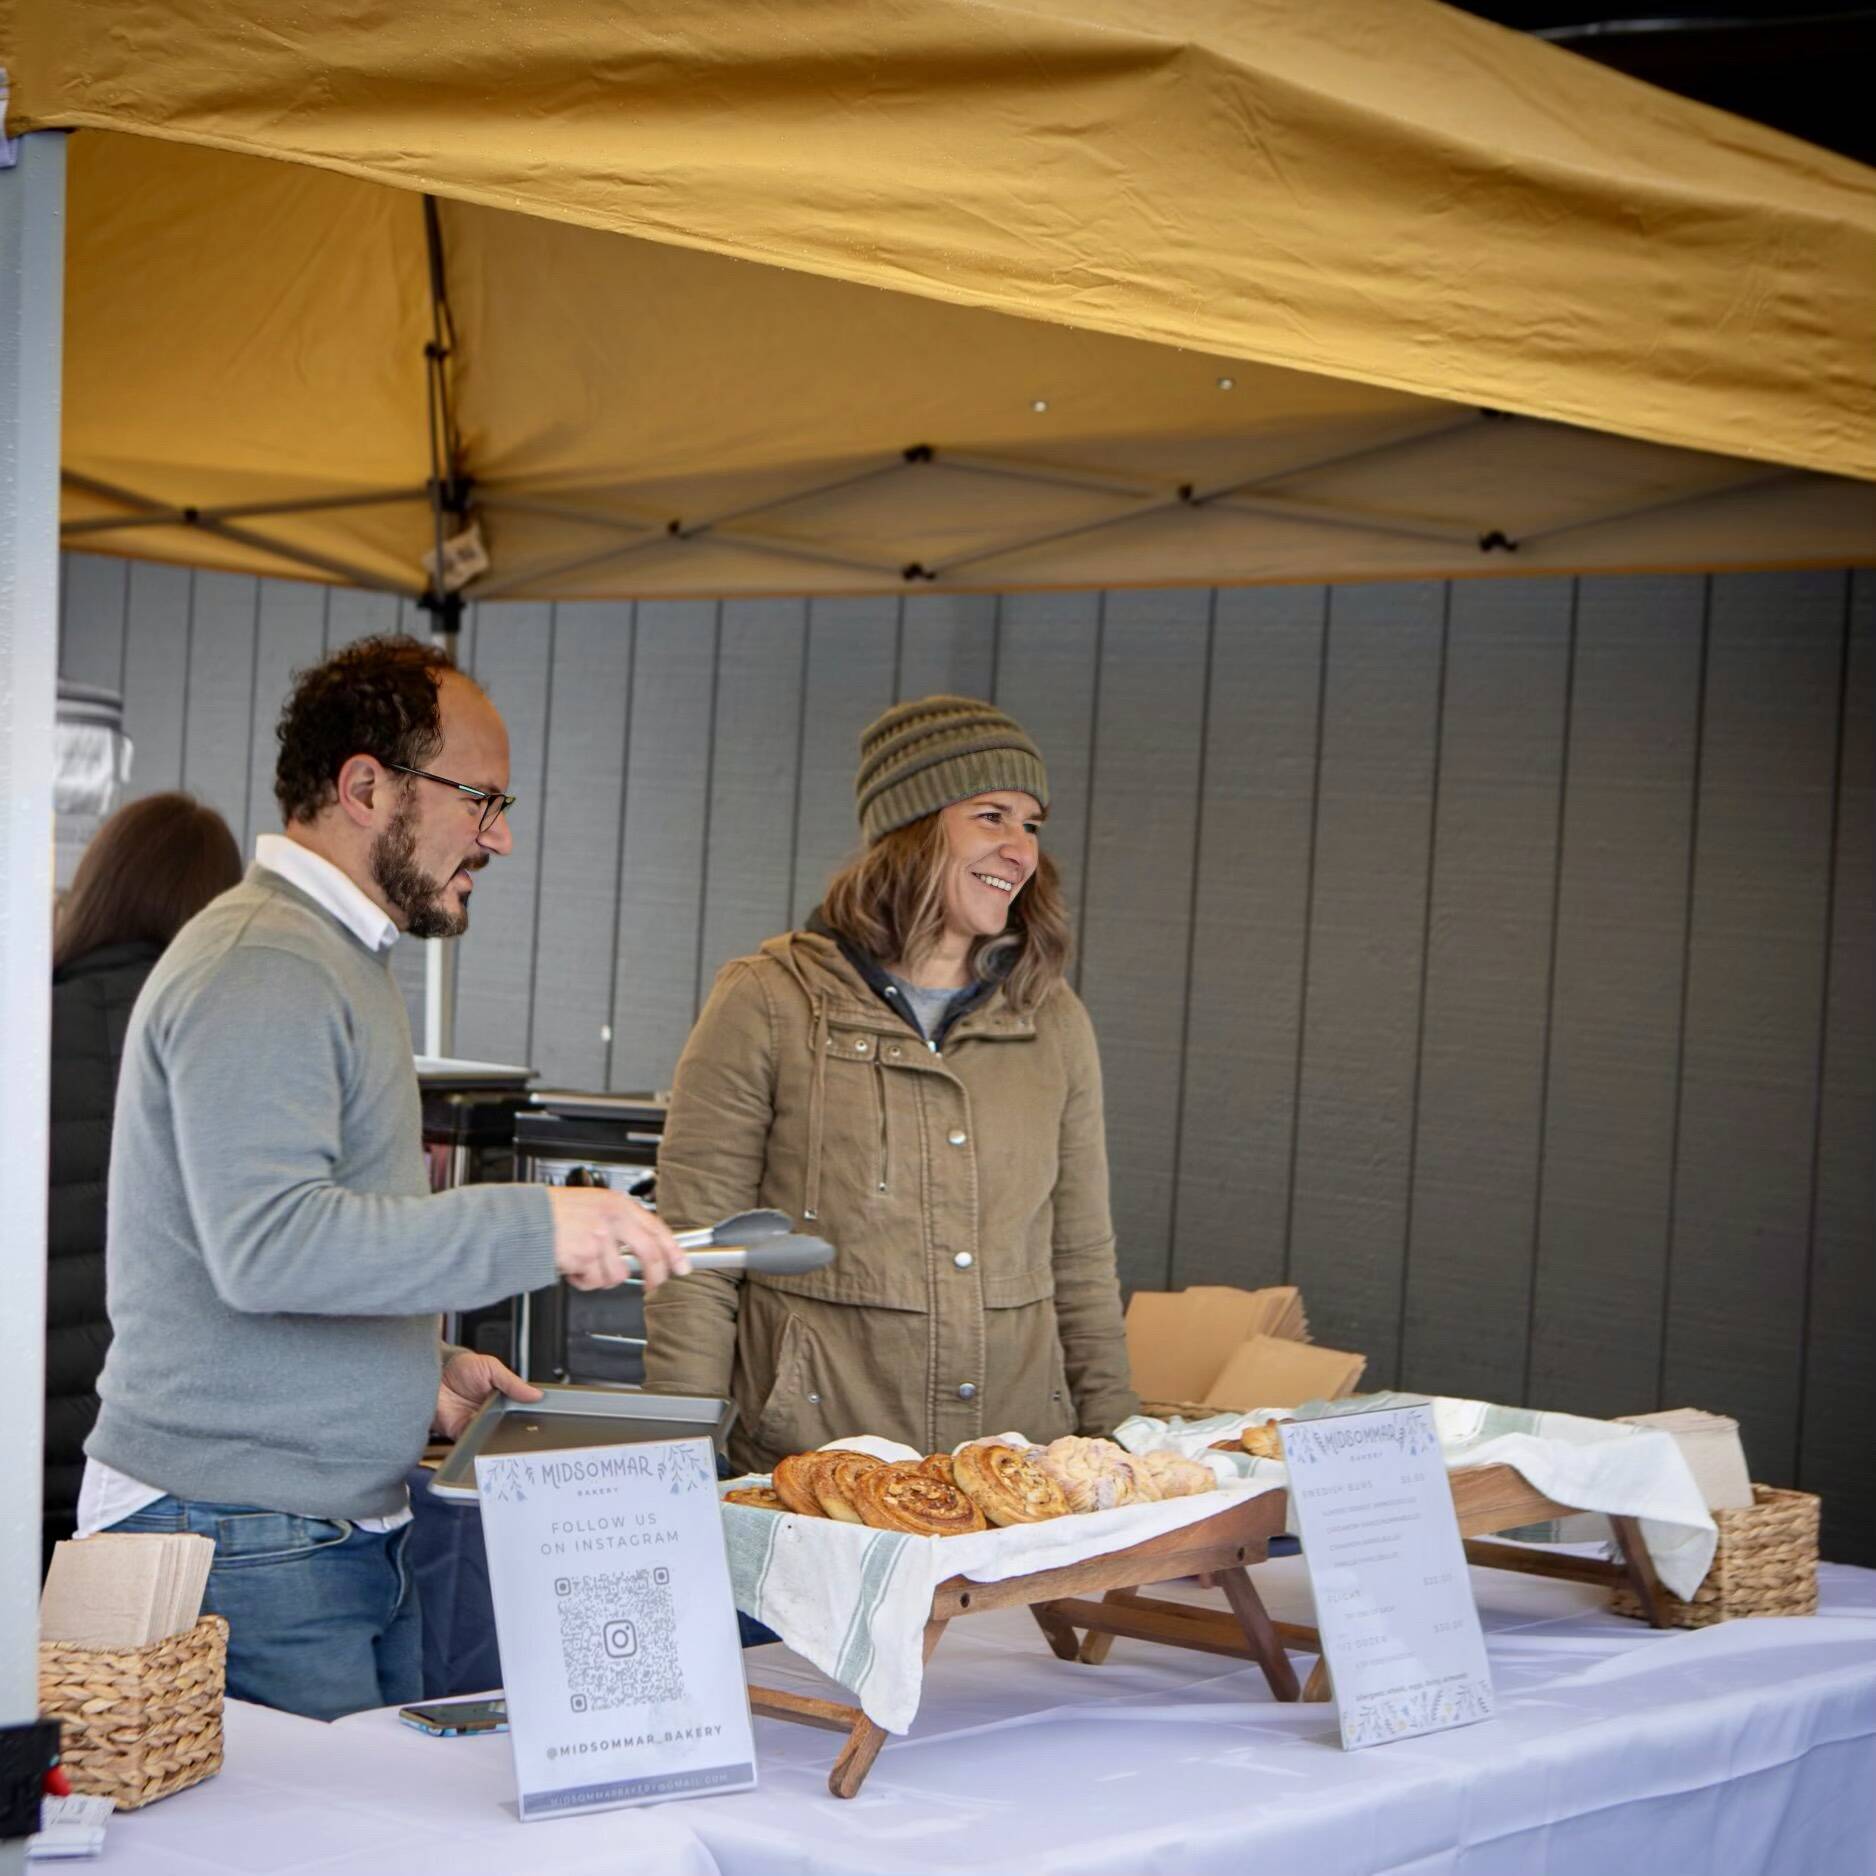 Thea Billing and Noah Citron, co-owners of Midsommar Bakery, started selling Swedish buns and other pastries at the Proctor Farmers Market on Saturdays starting in March. Photos courtesy of Thea Billing and Noah Citron